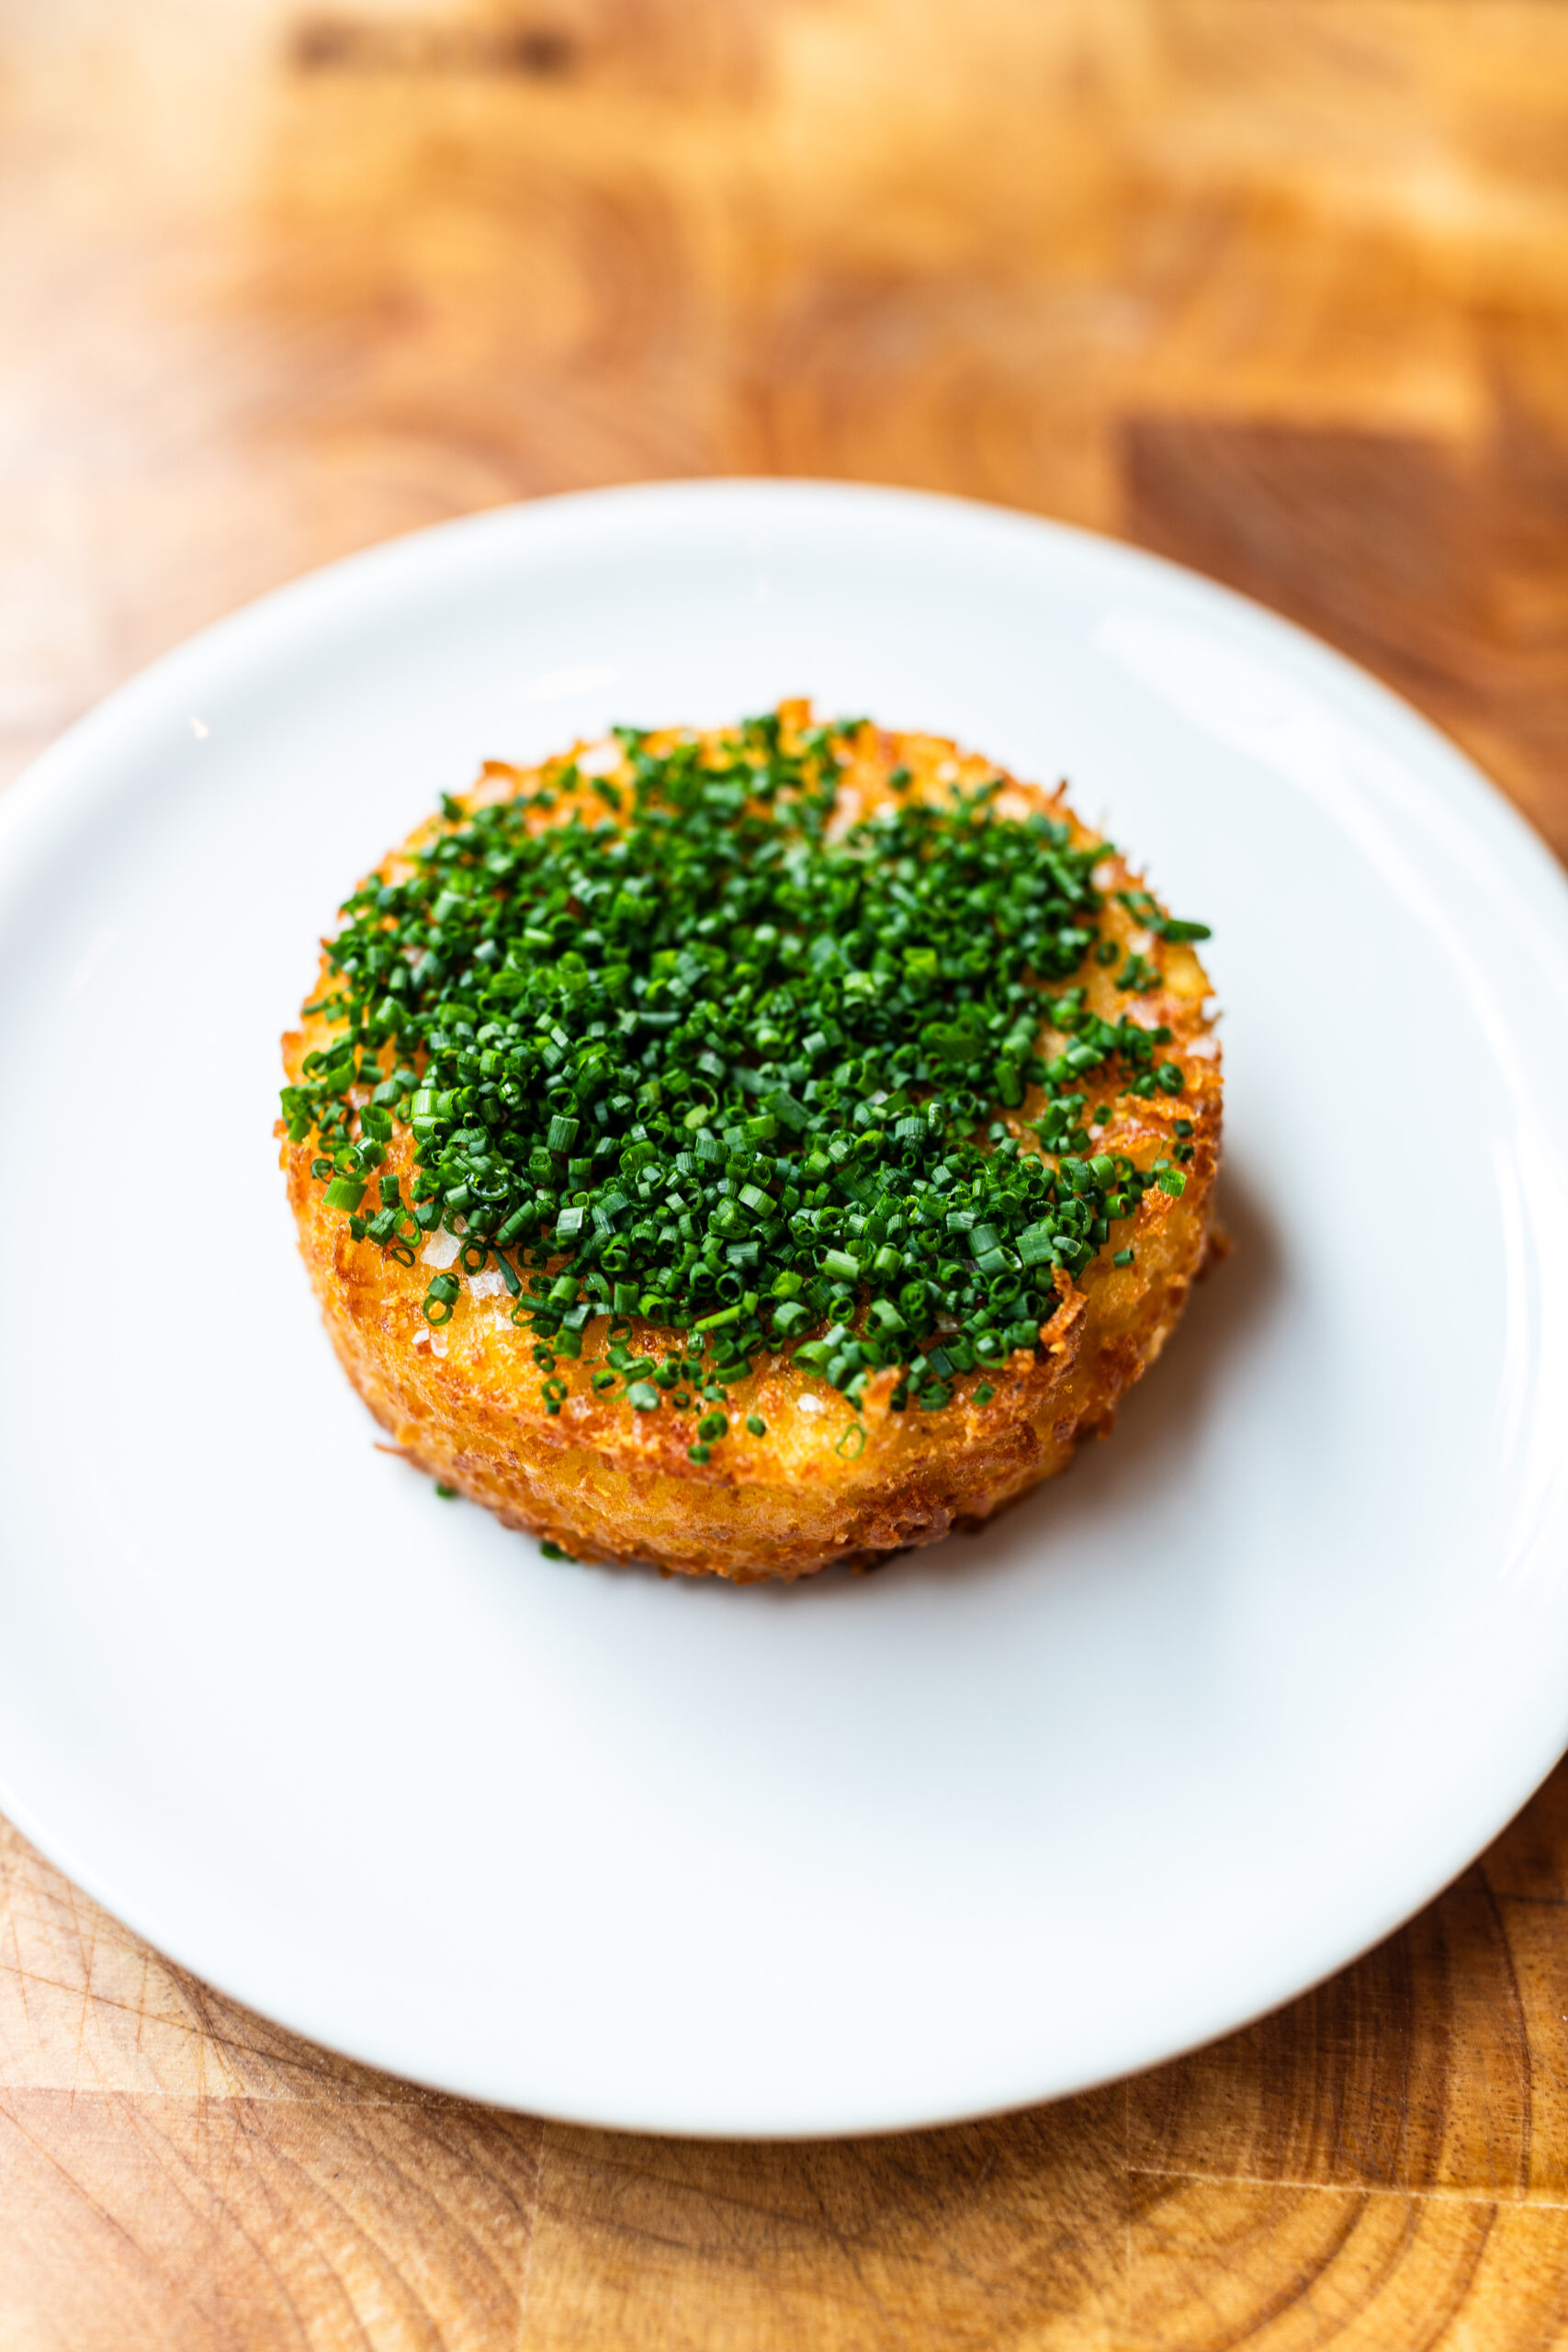 Egg yolk hash brown topped with chopped chives on a white plate and wooden background